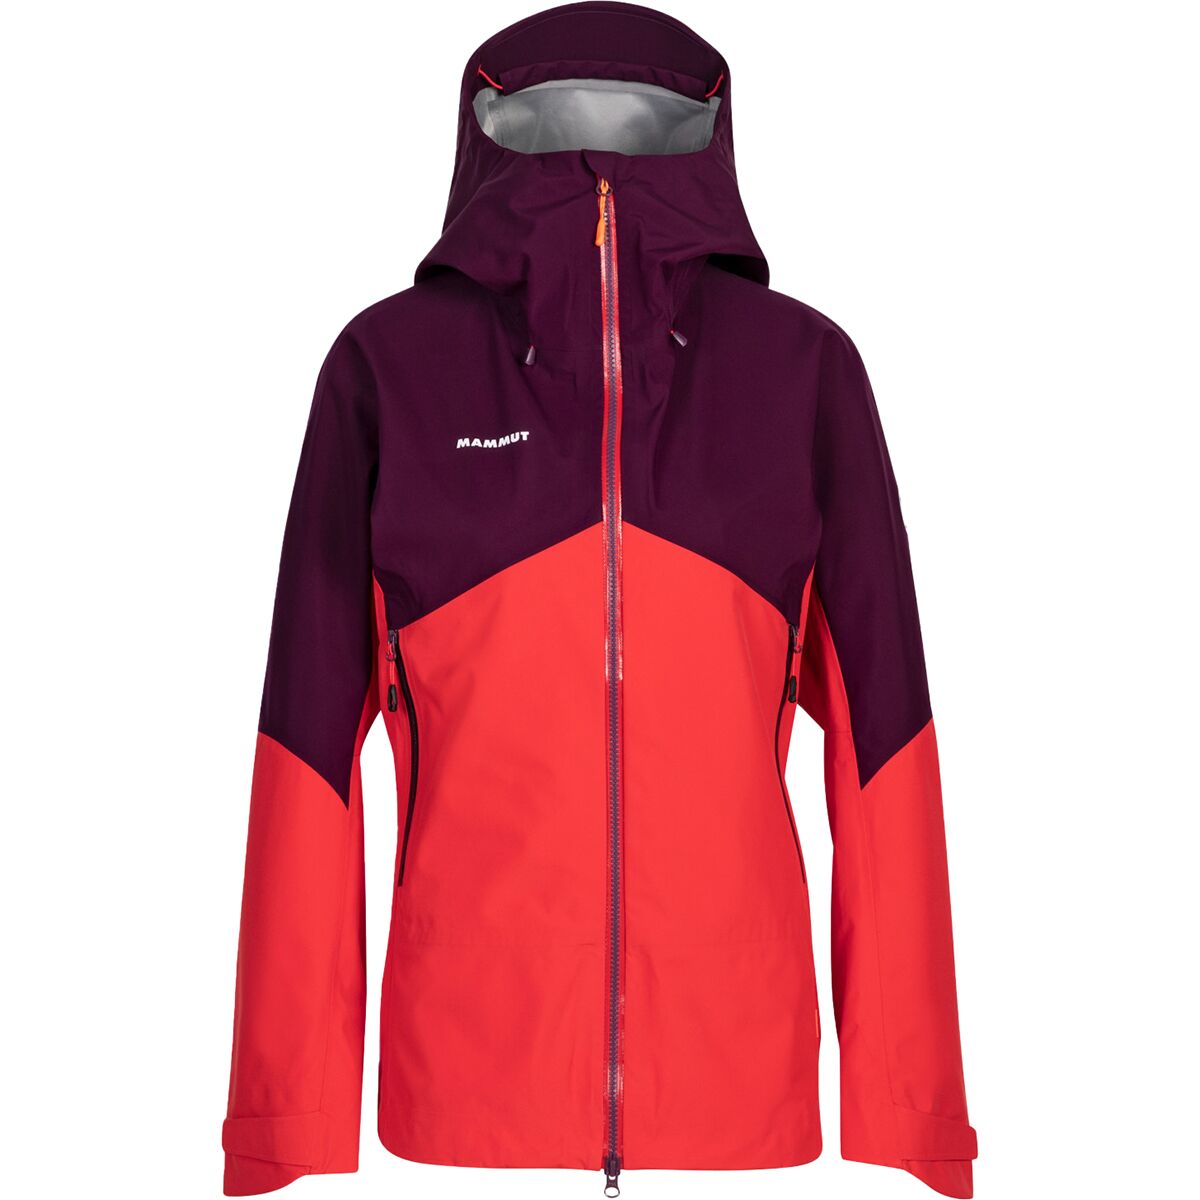 Crater HS Hooded Jacket - Women